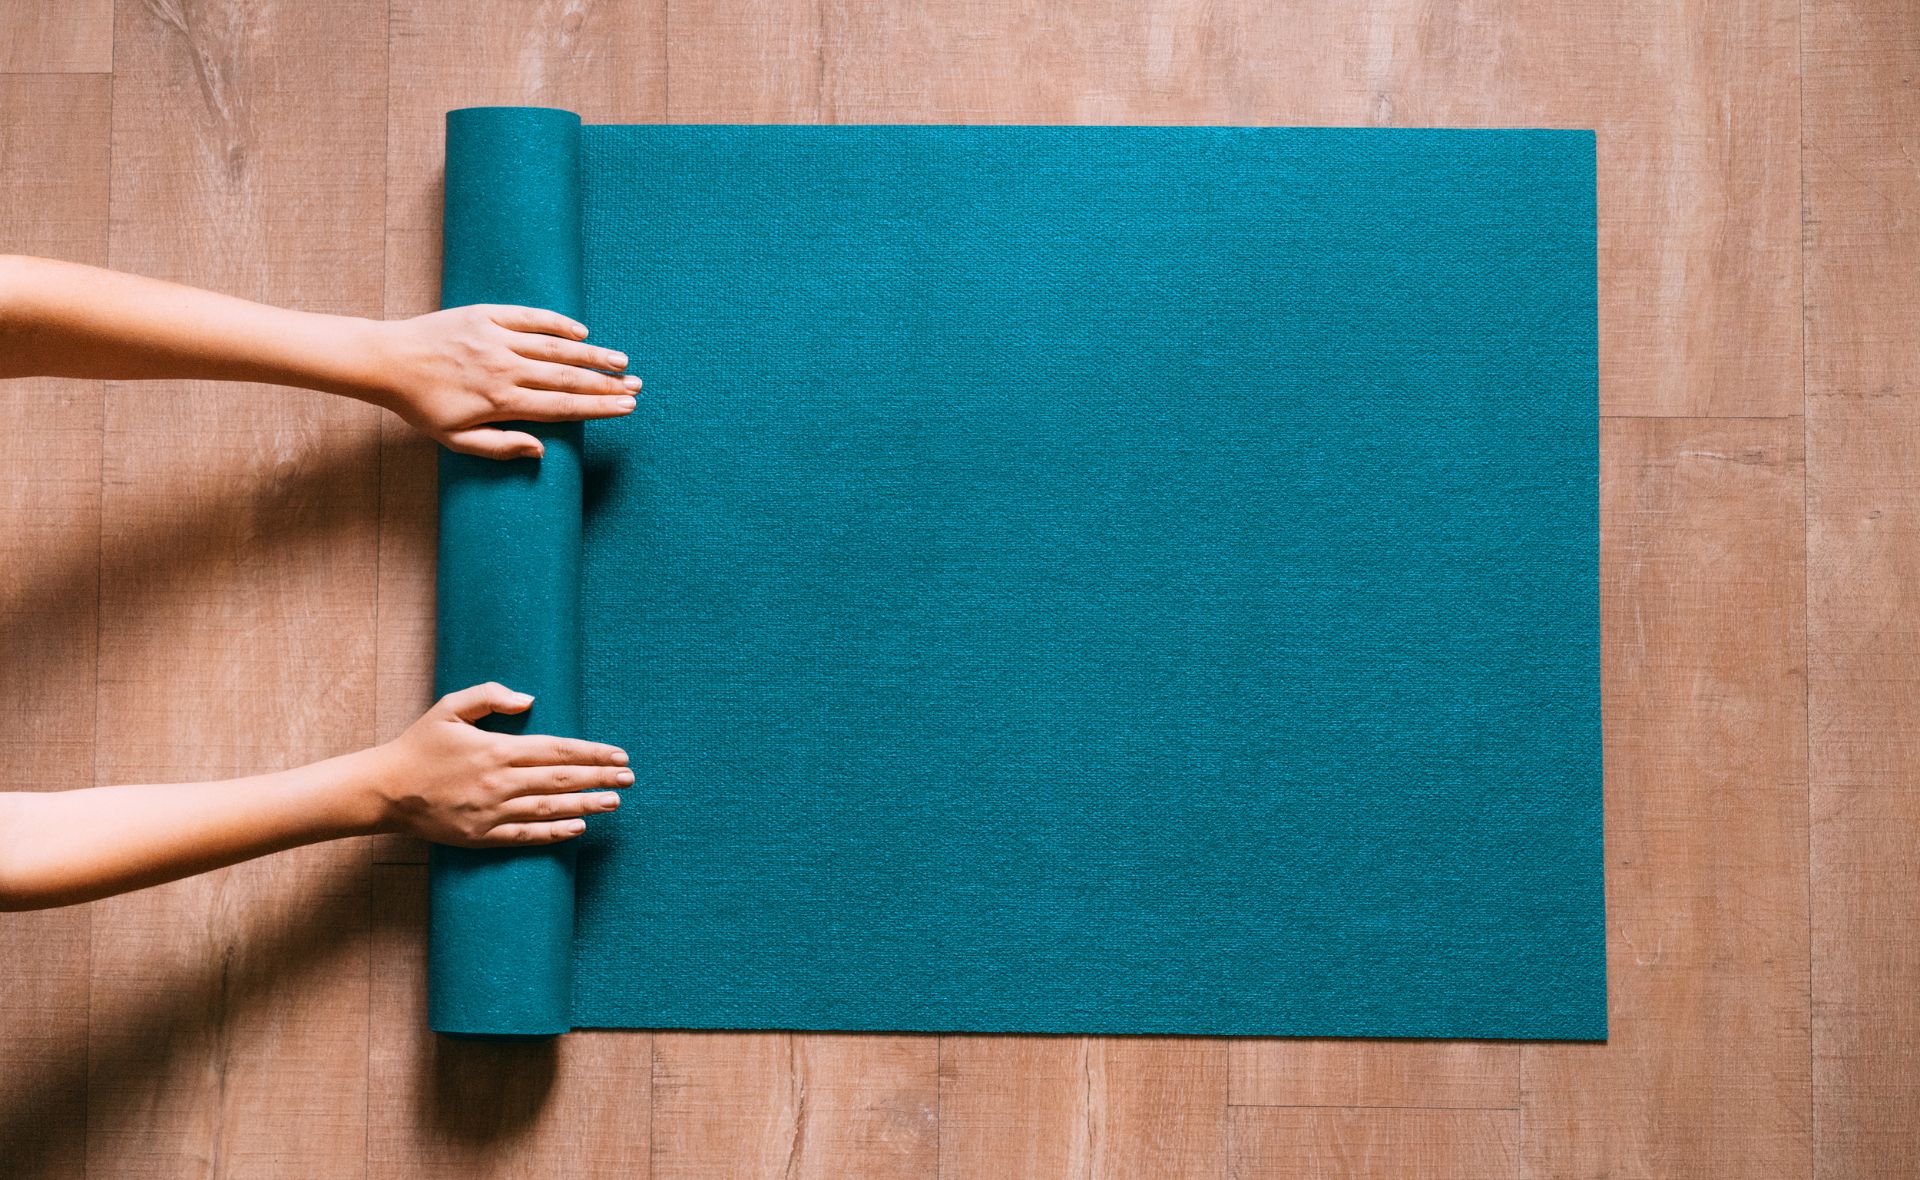 Pilates perfection: The best Pilates mats that will make you the envy of the class